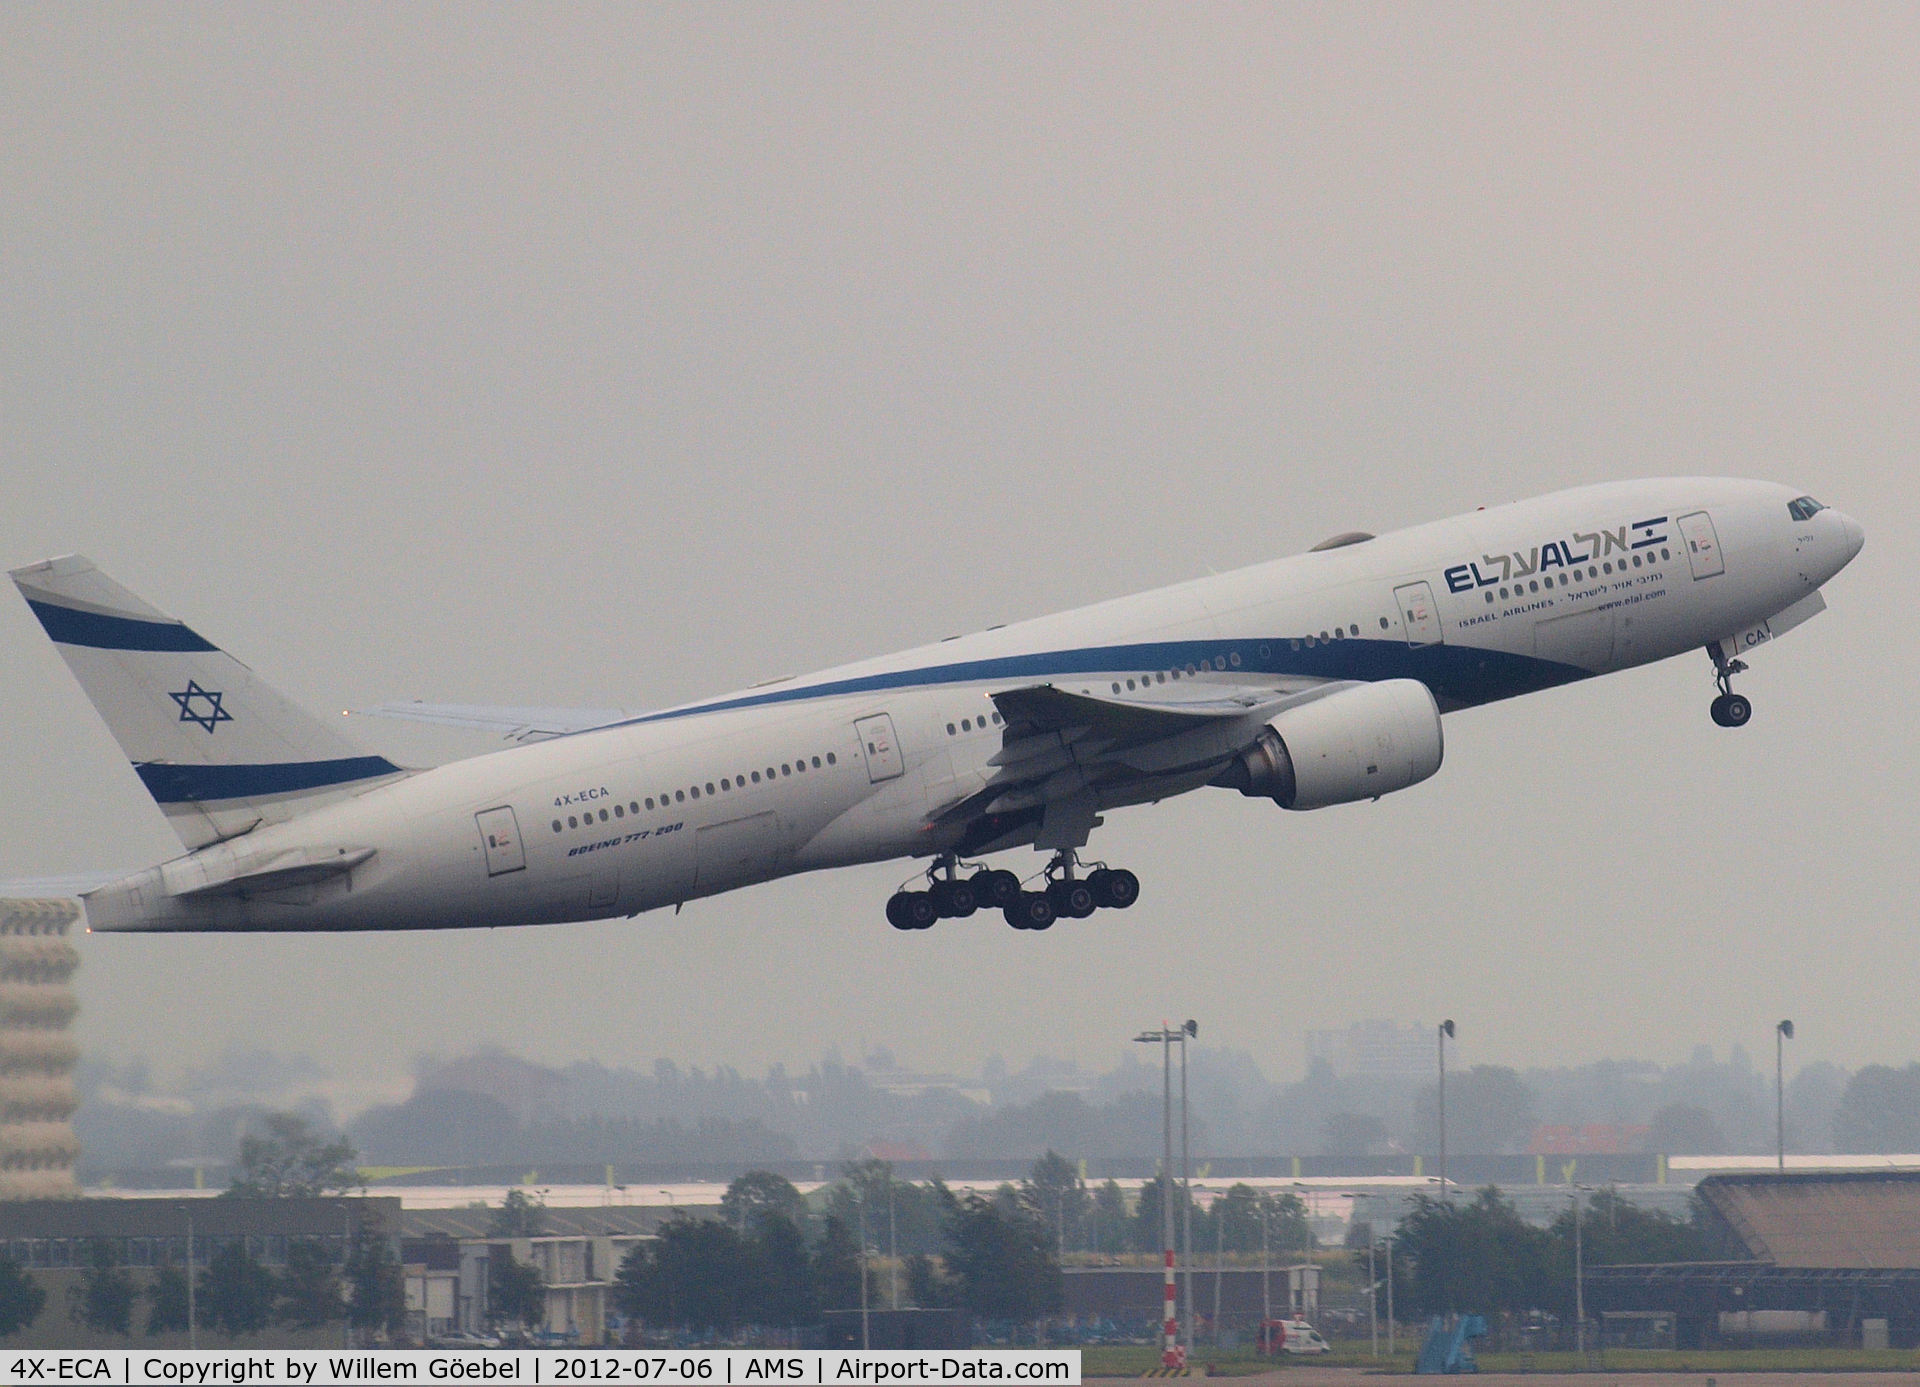 4X-ECA, 2001 Boeing 777-258/ER C/N 30831, Take off from runway L18 of Schiphol Airport